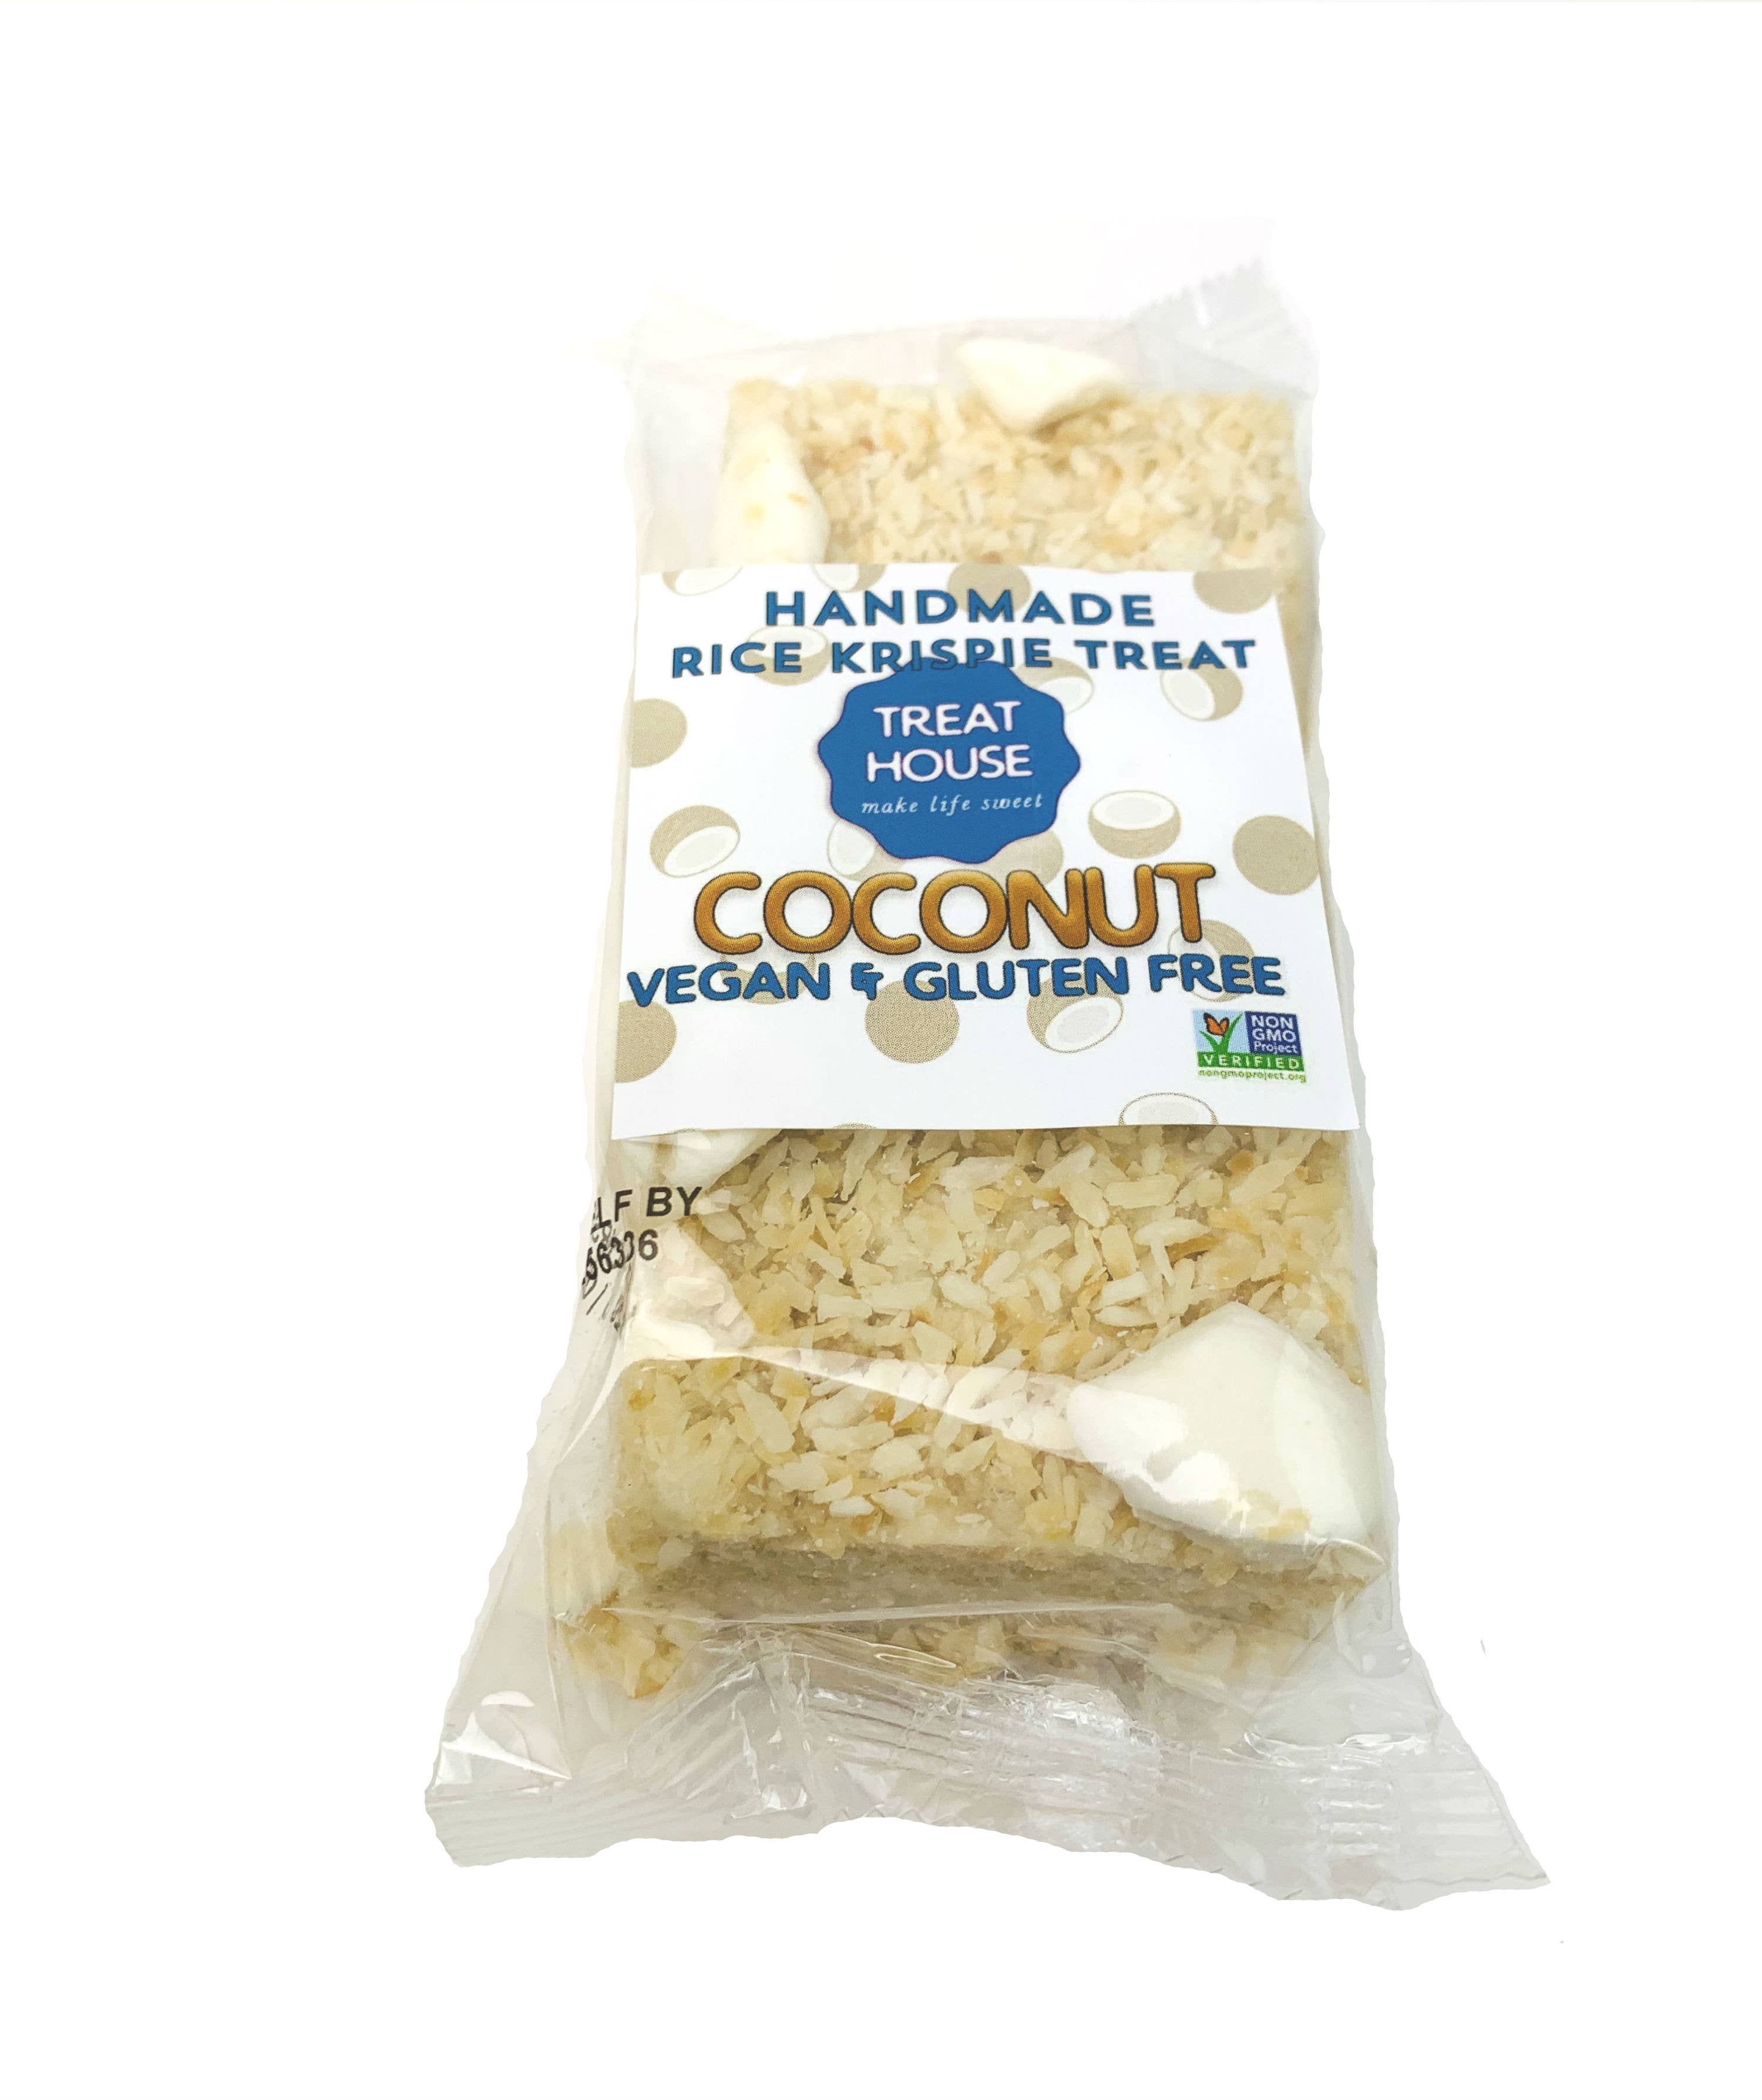 Toasted Coconut Vegan, Gluten Free, Dairy Free, and Non-GMO